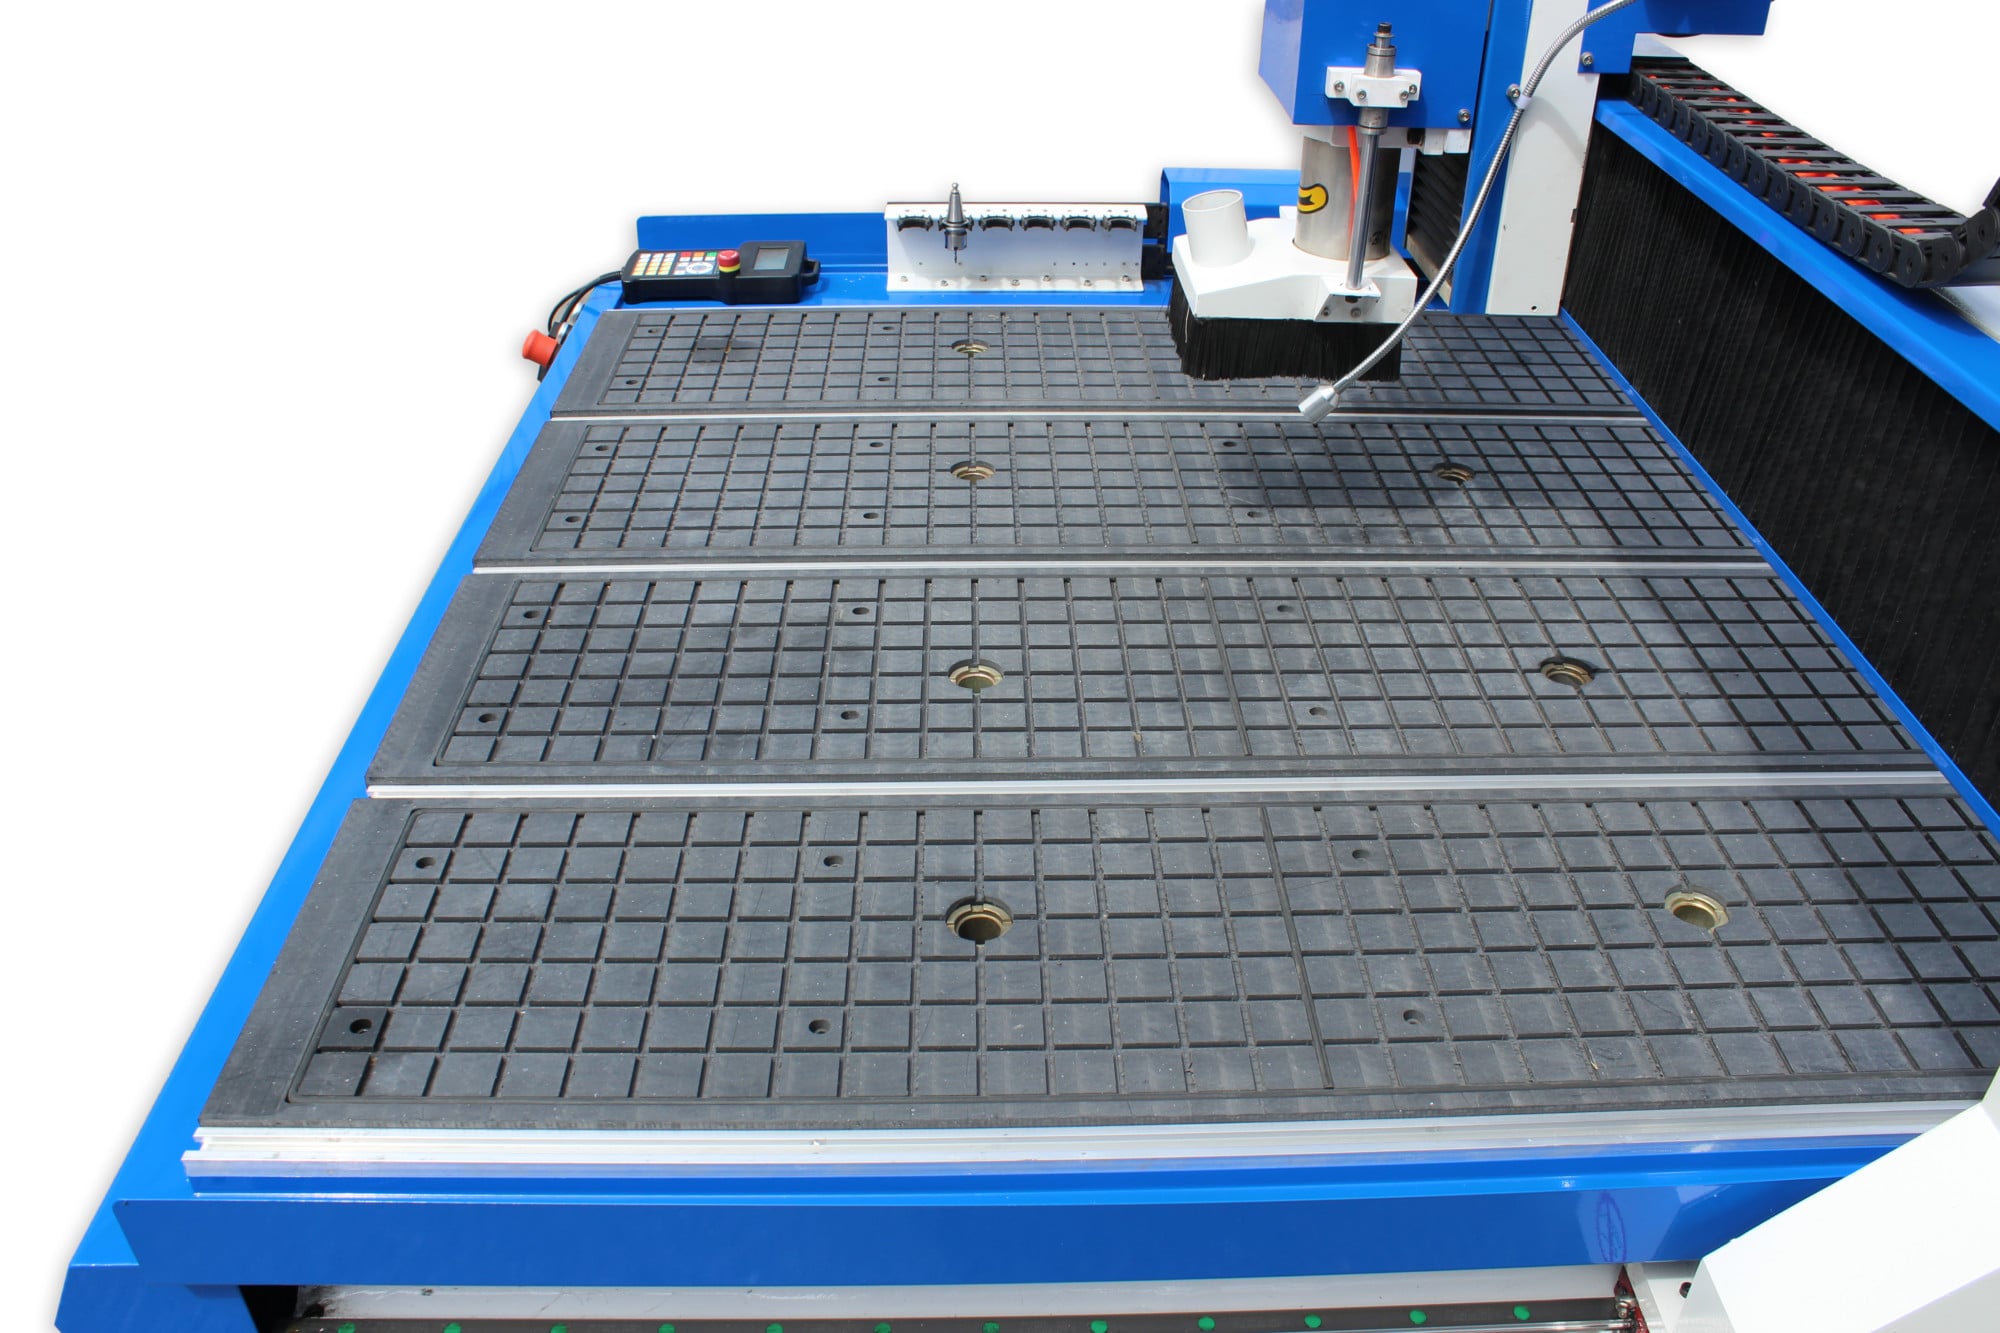 B1-44 ATC CNC Router Side View